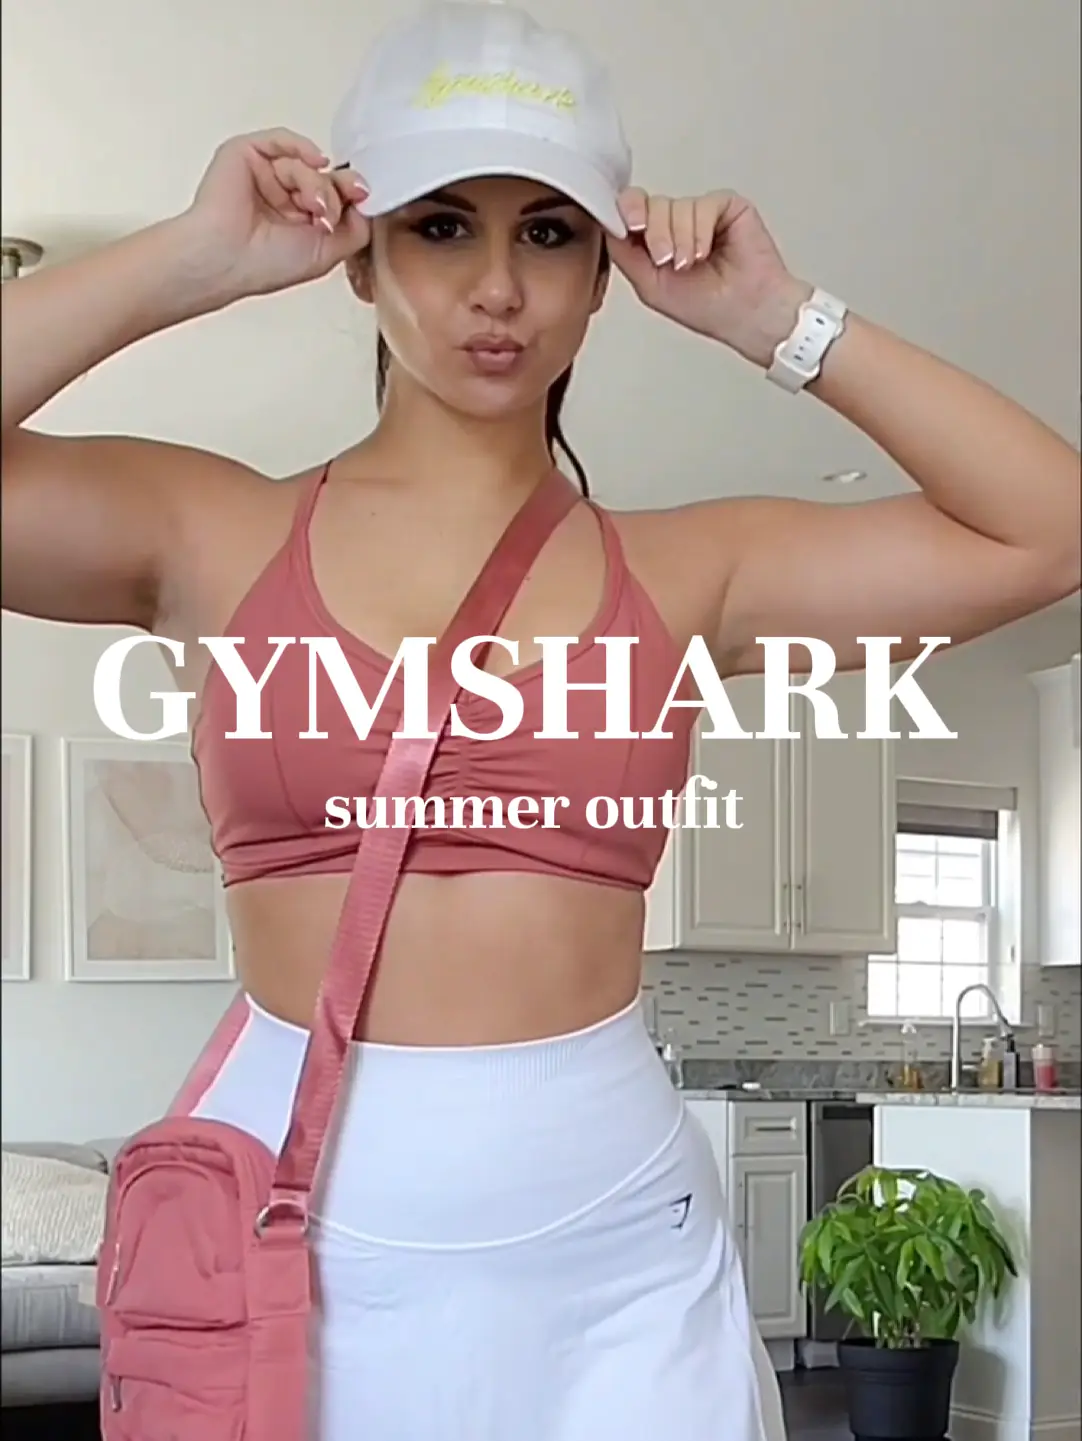 ESSENTIAL GYMSHARK SUMMER OUTFITS PT.1, Video published by Ashley Gaita